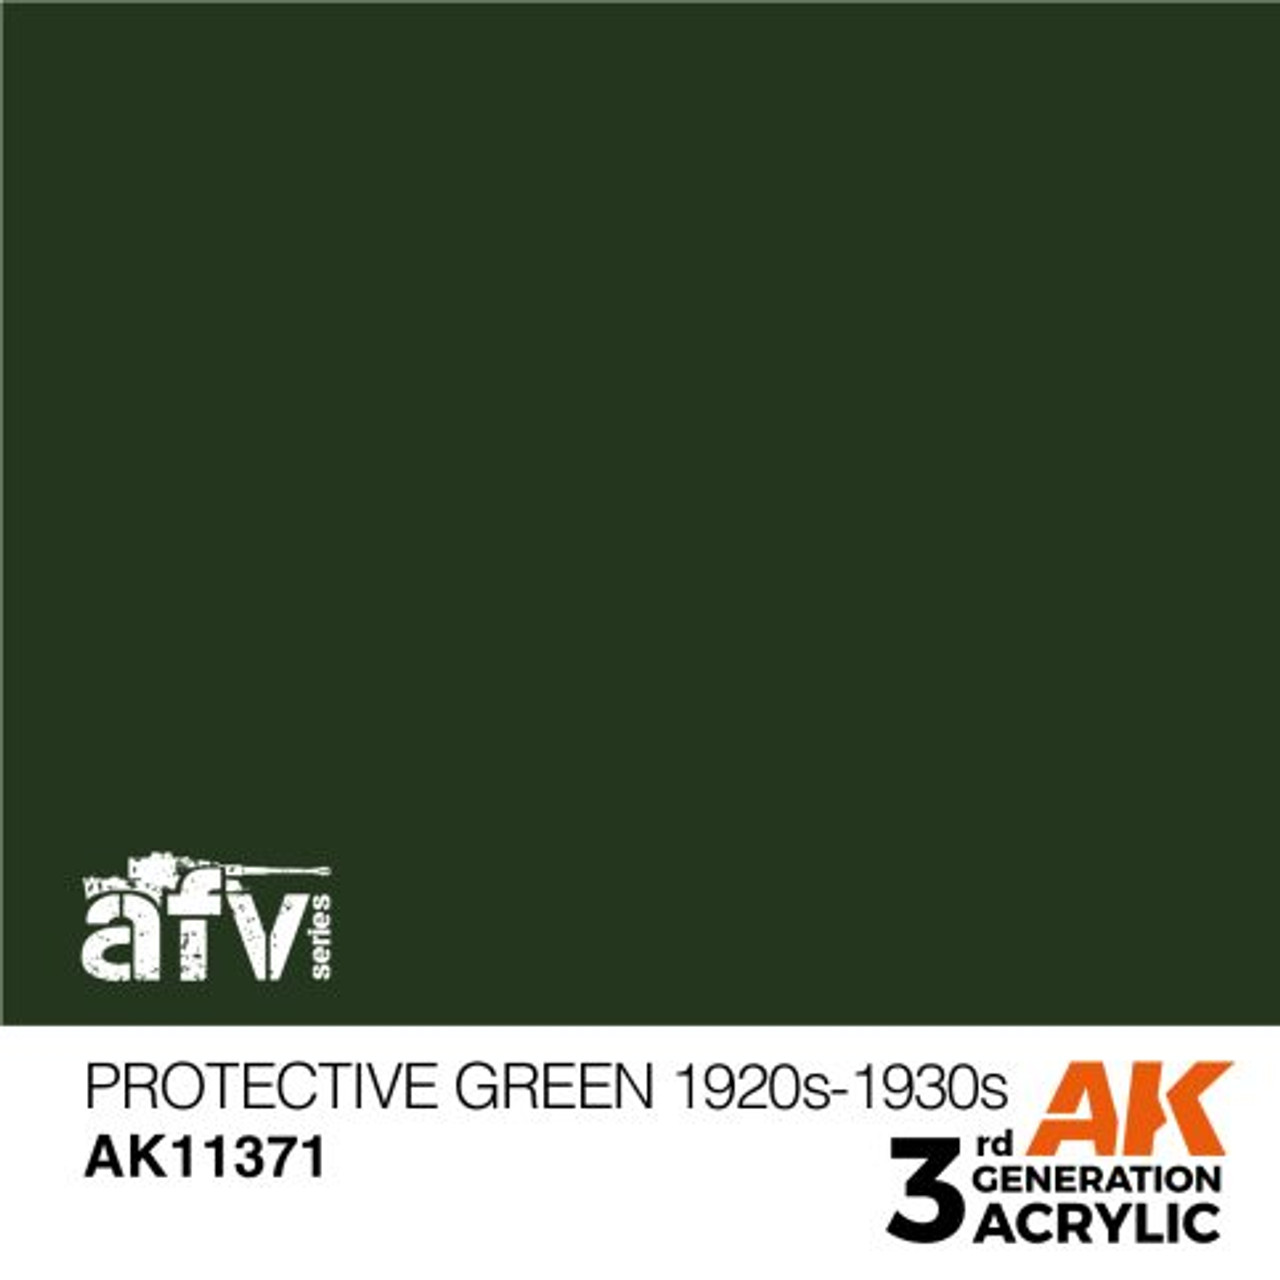 3G AFV 371 - Protective Green 1920s-1930s